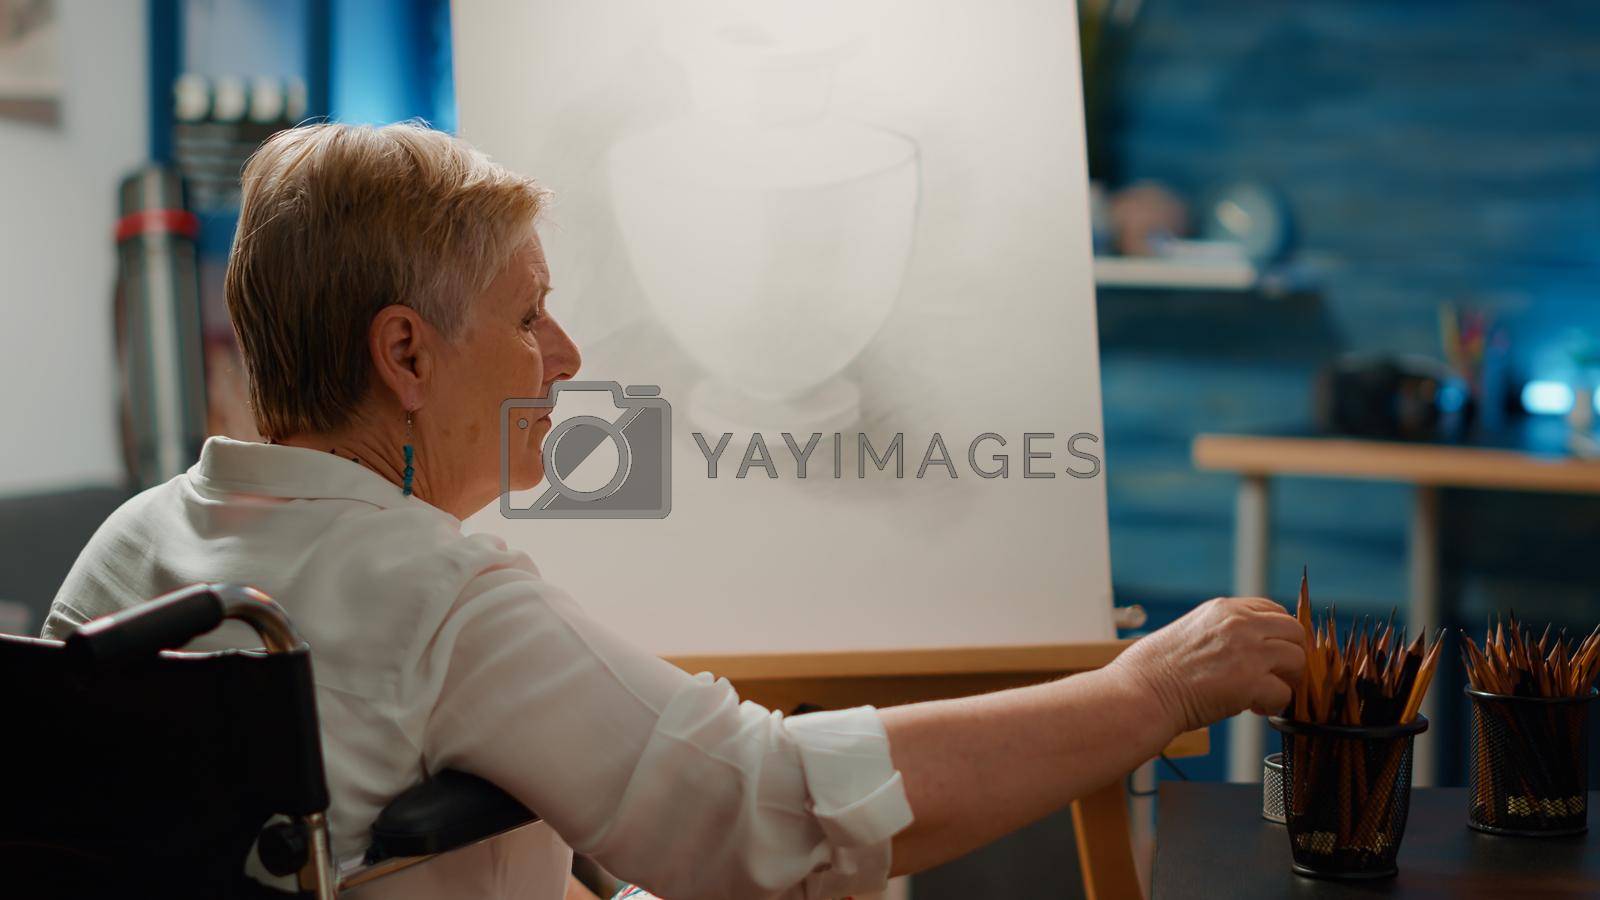 Royalty free image of Retired person with health condition using pencils to draw vase design by DCStudio